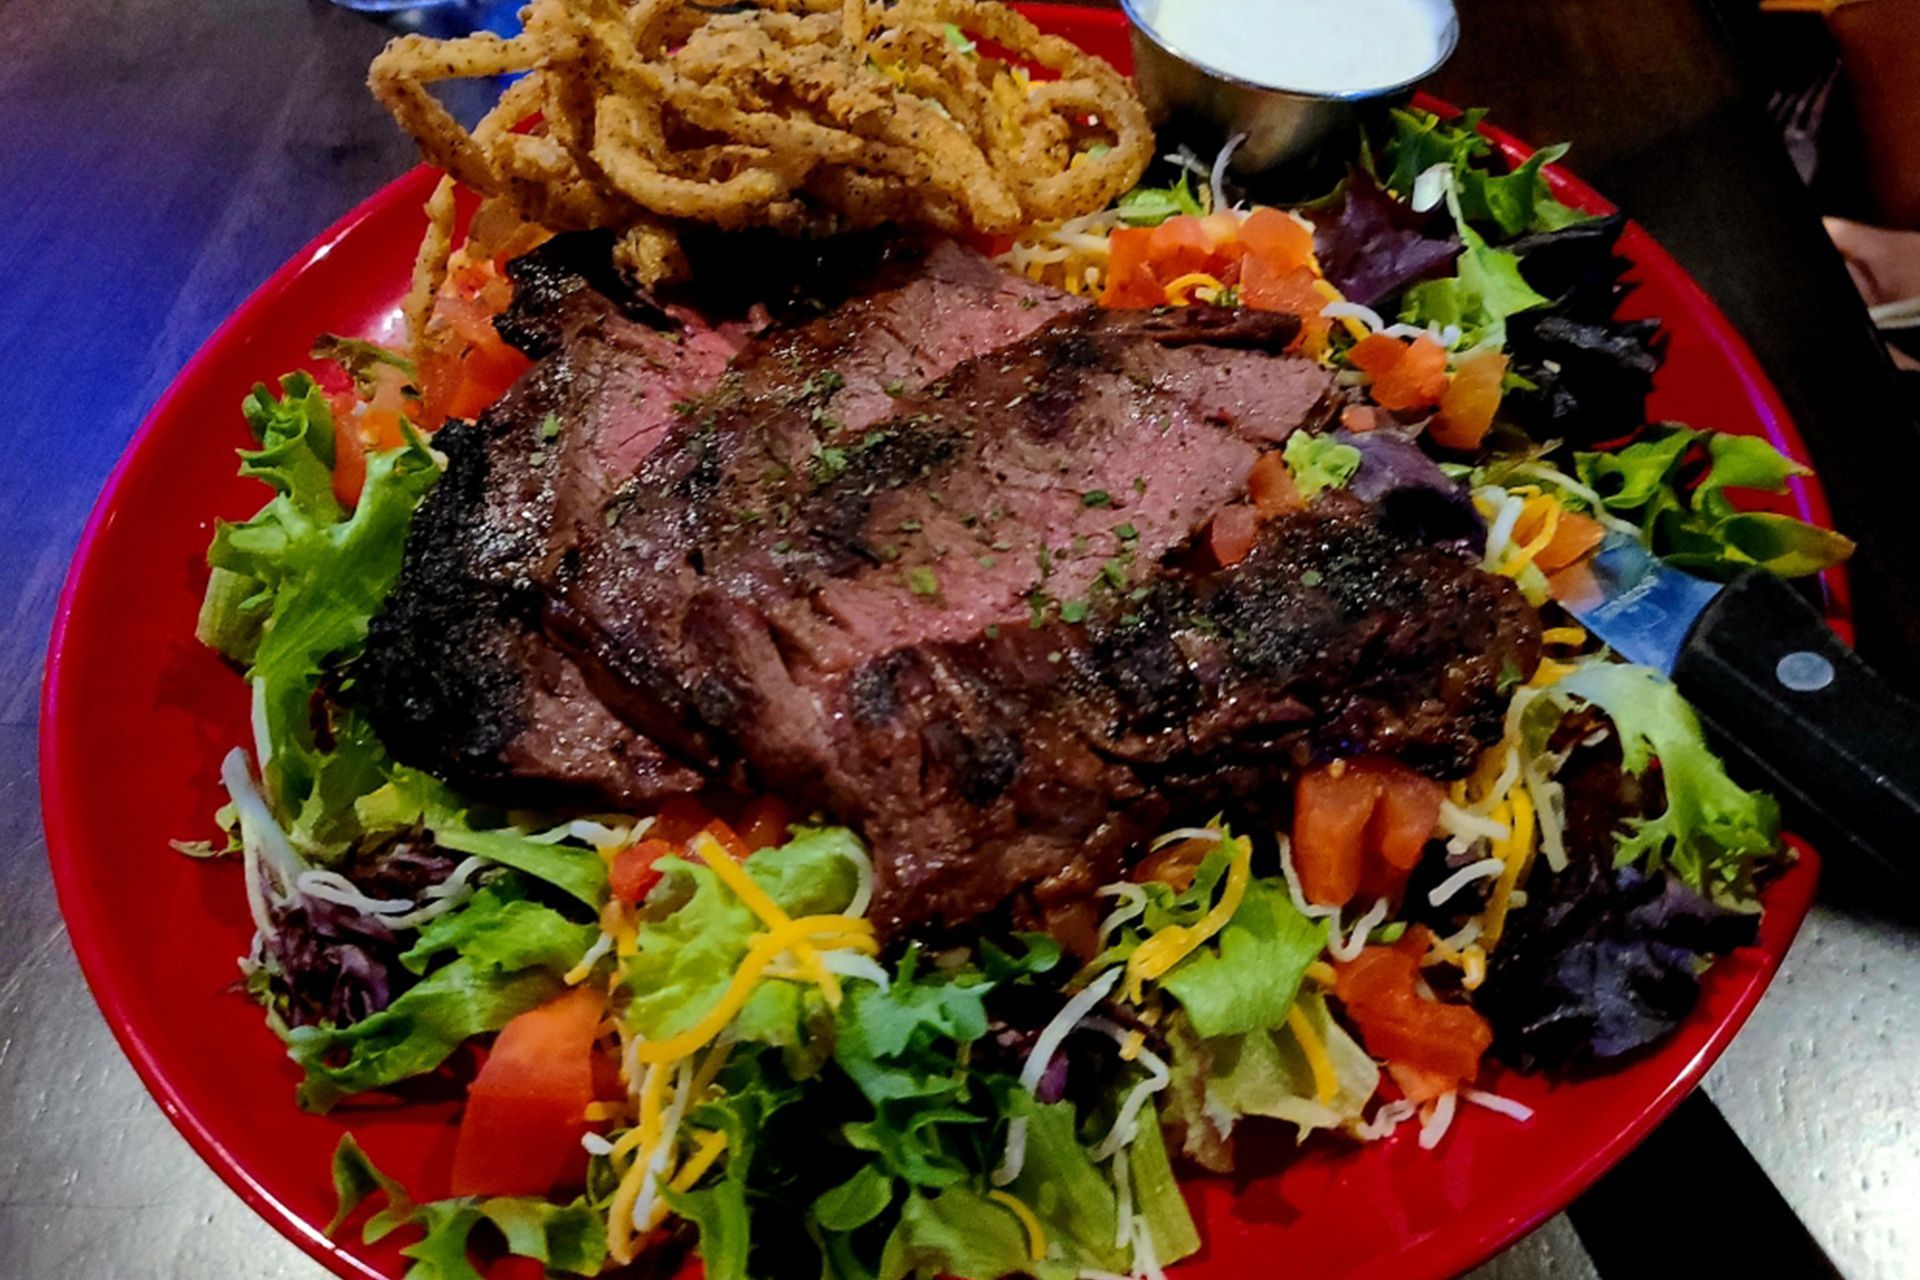 A salad with steak and onion rings on a red plate.